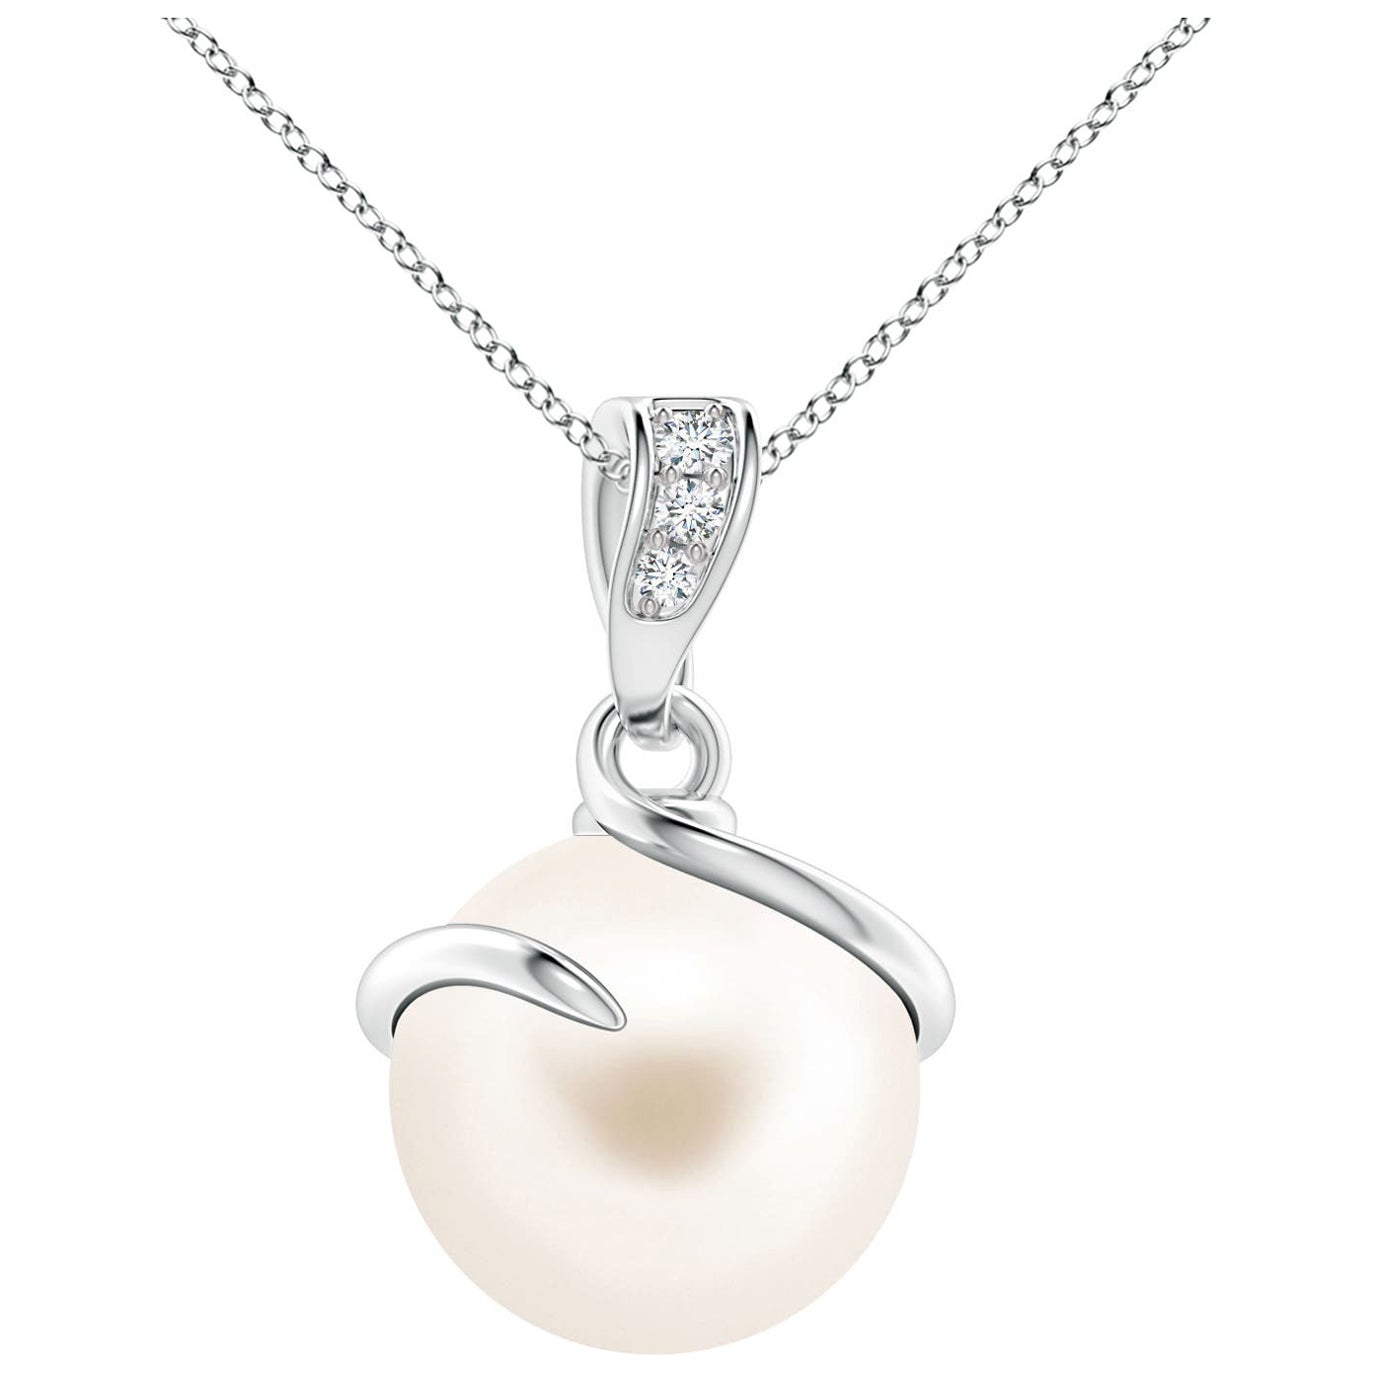 Freshwater Cultured Pearl Spiral Pendant with Diamonds in 14K White Gold